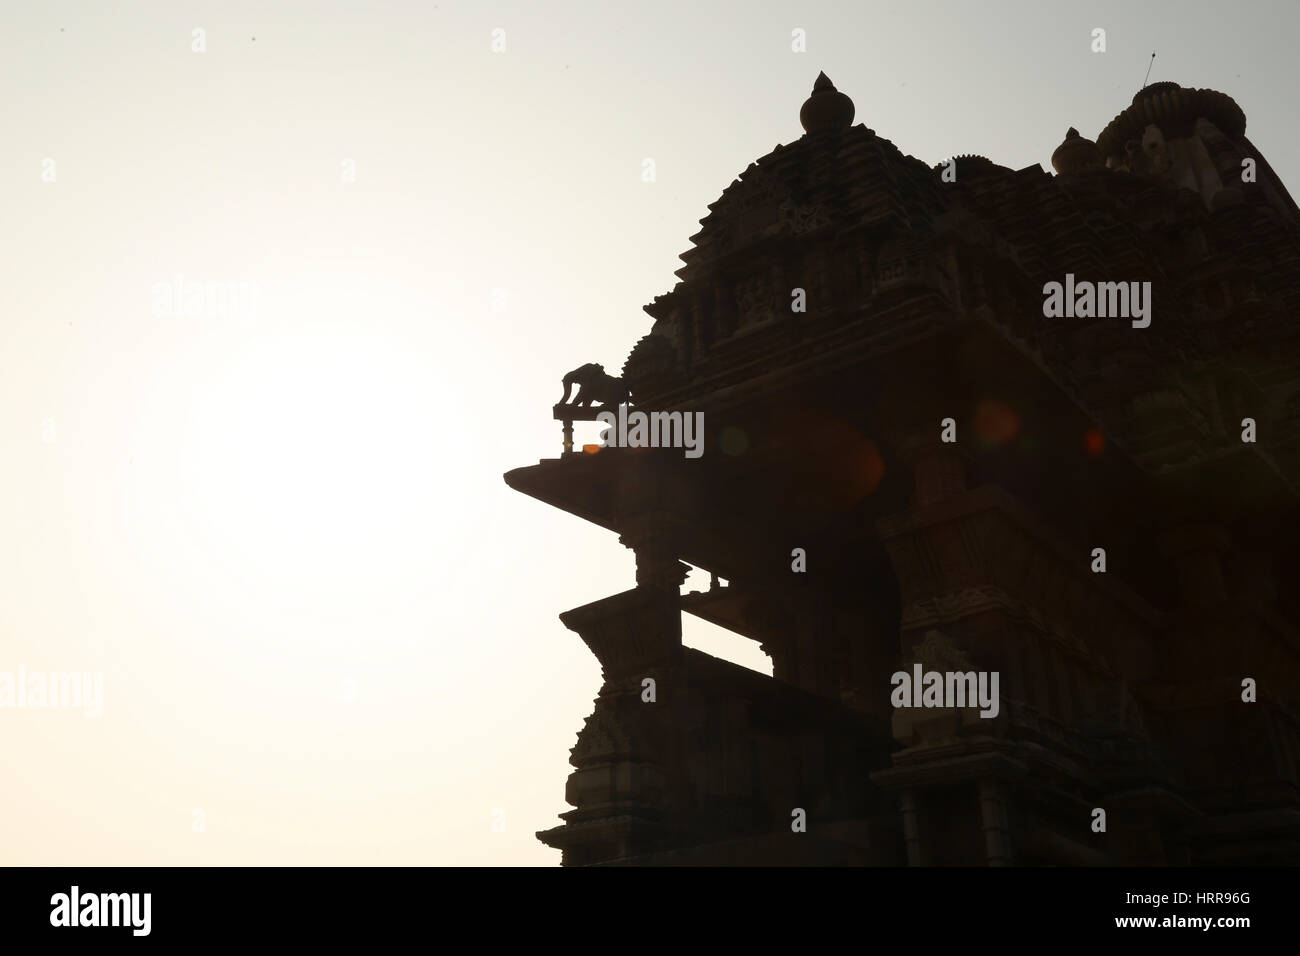 Silhouette of the famous Hindu temple in the Western Group of Chandela Temples at Khajuraho, Madhya Pradesh, India Stock Photo